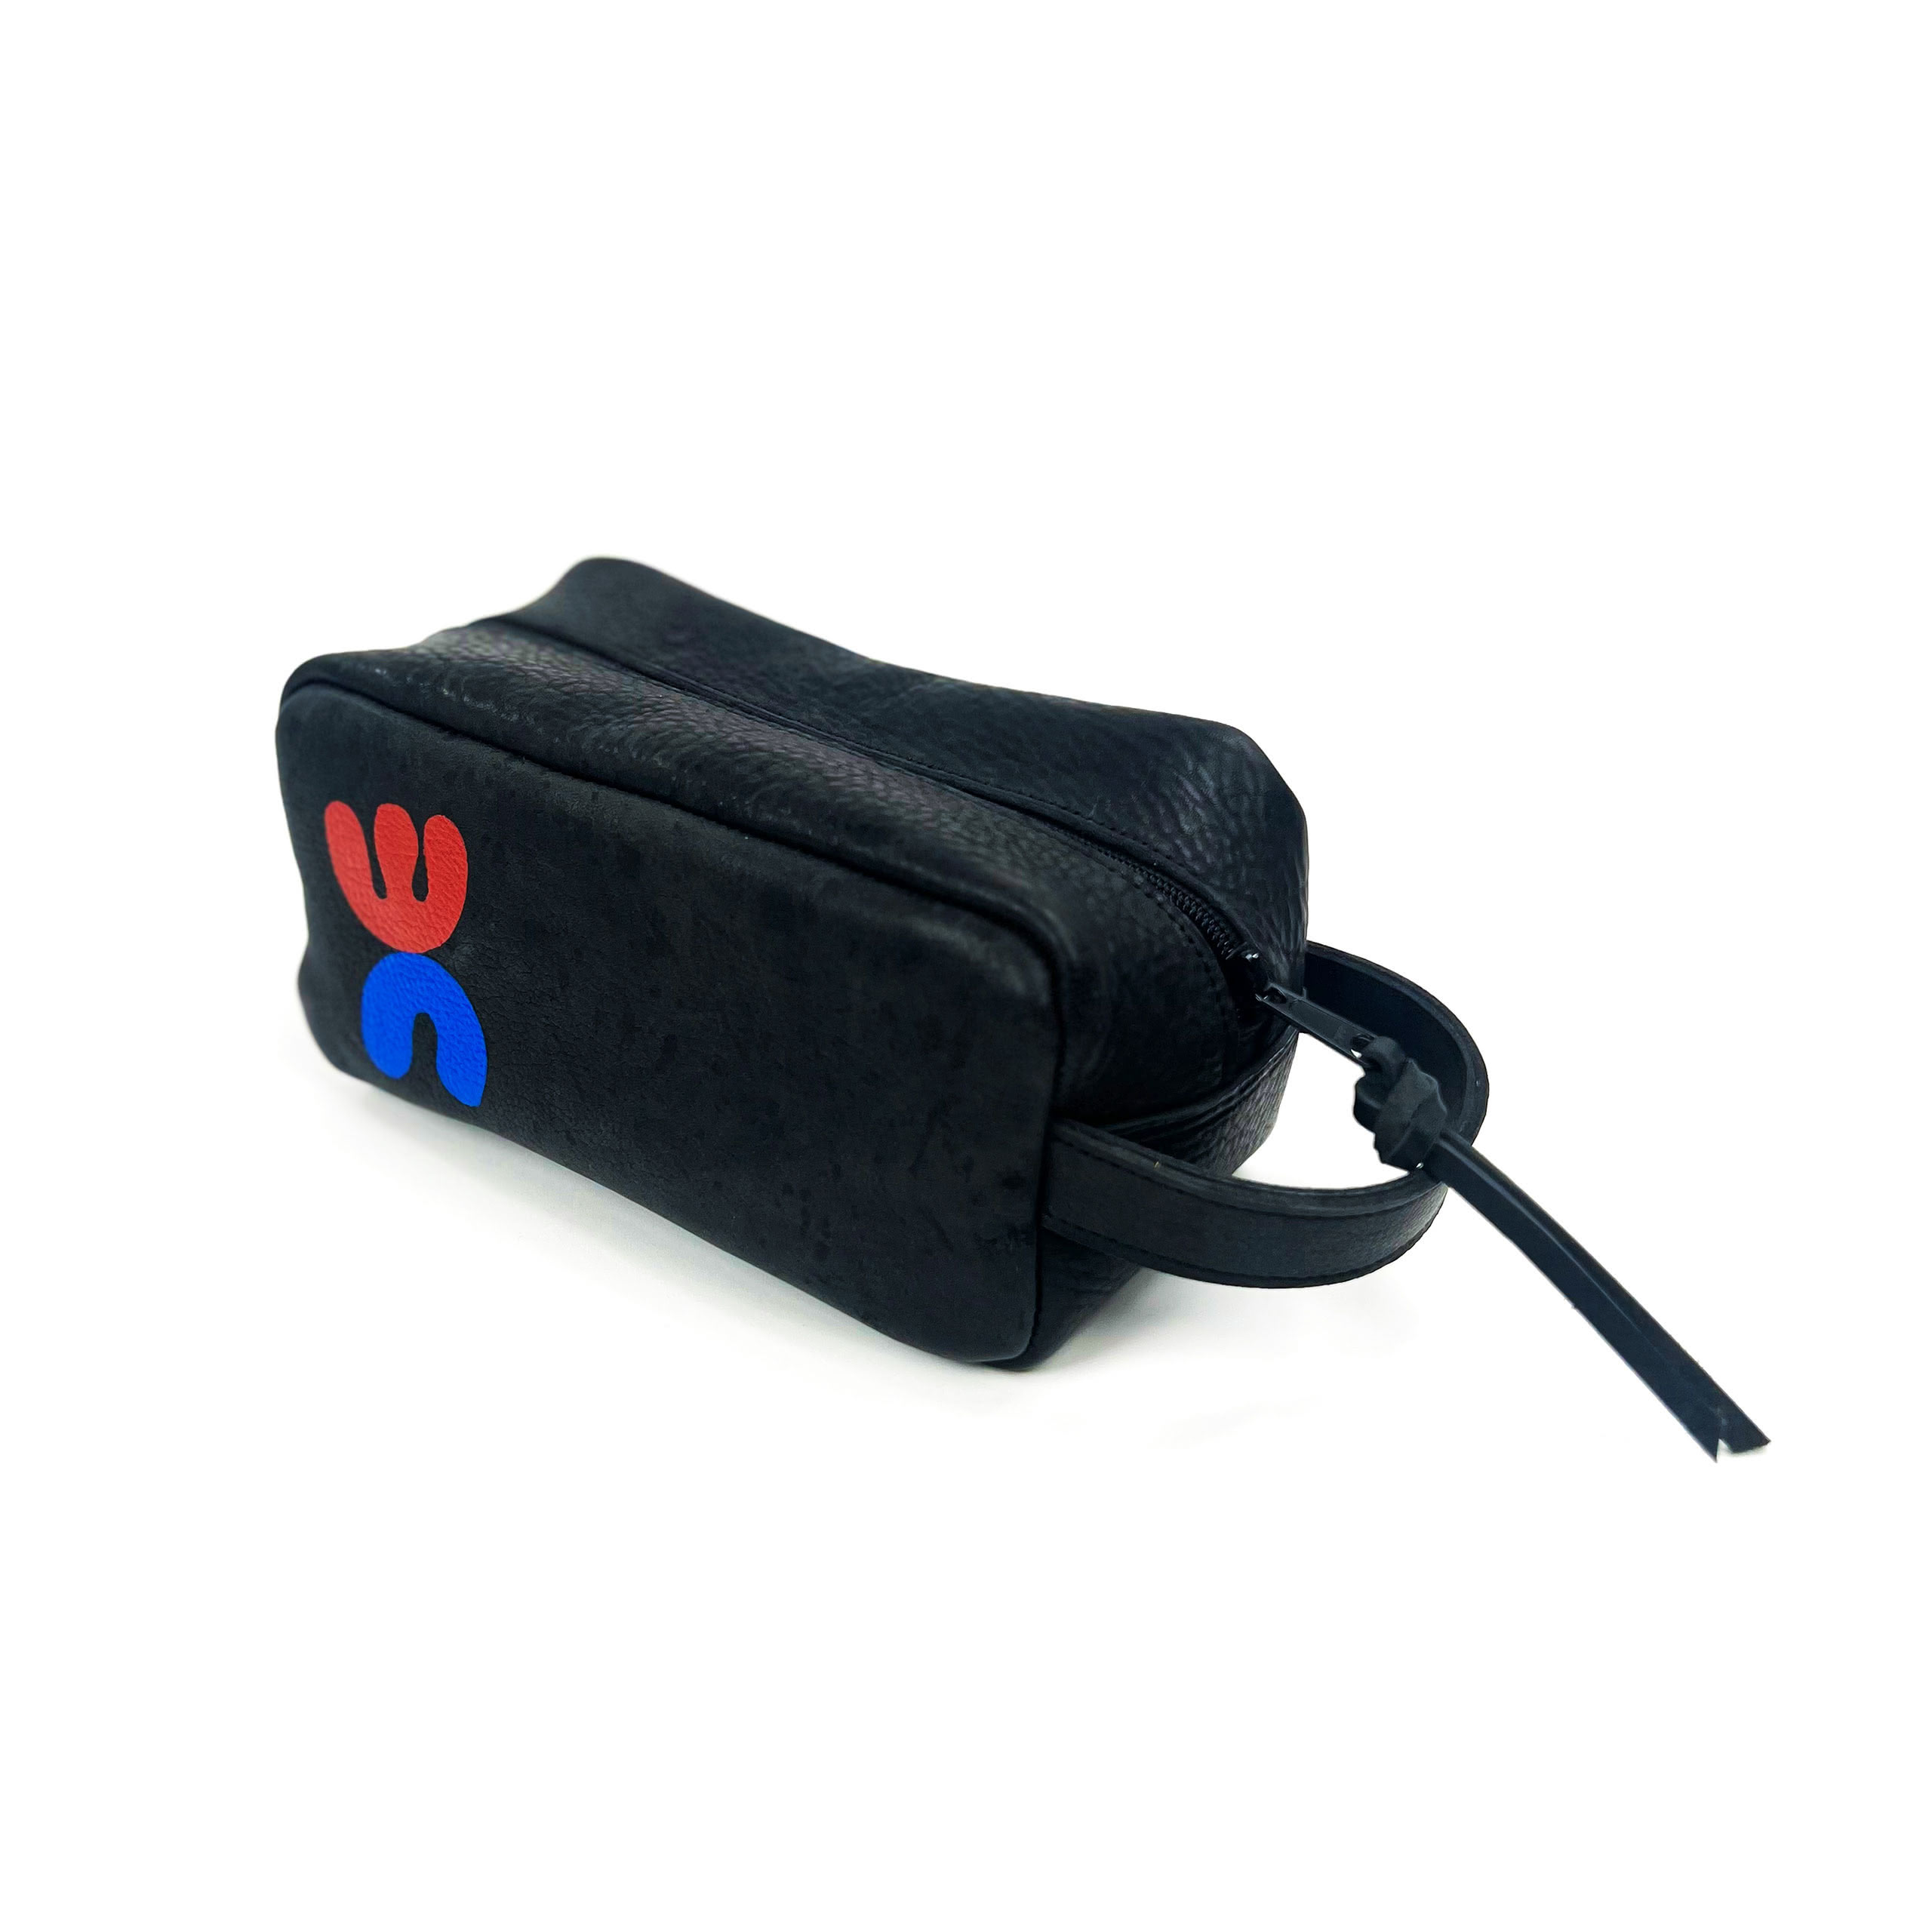 Black cosmetic bag with a red and blue handprint logo and text on the side, positioned against a white background.